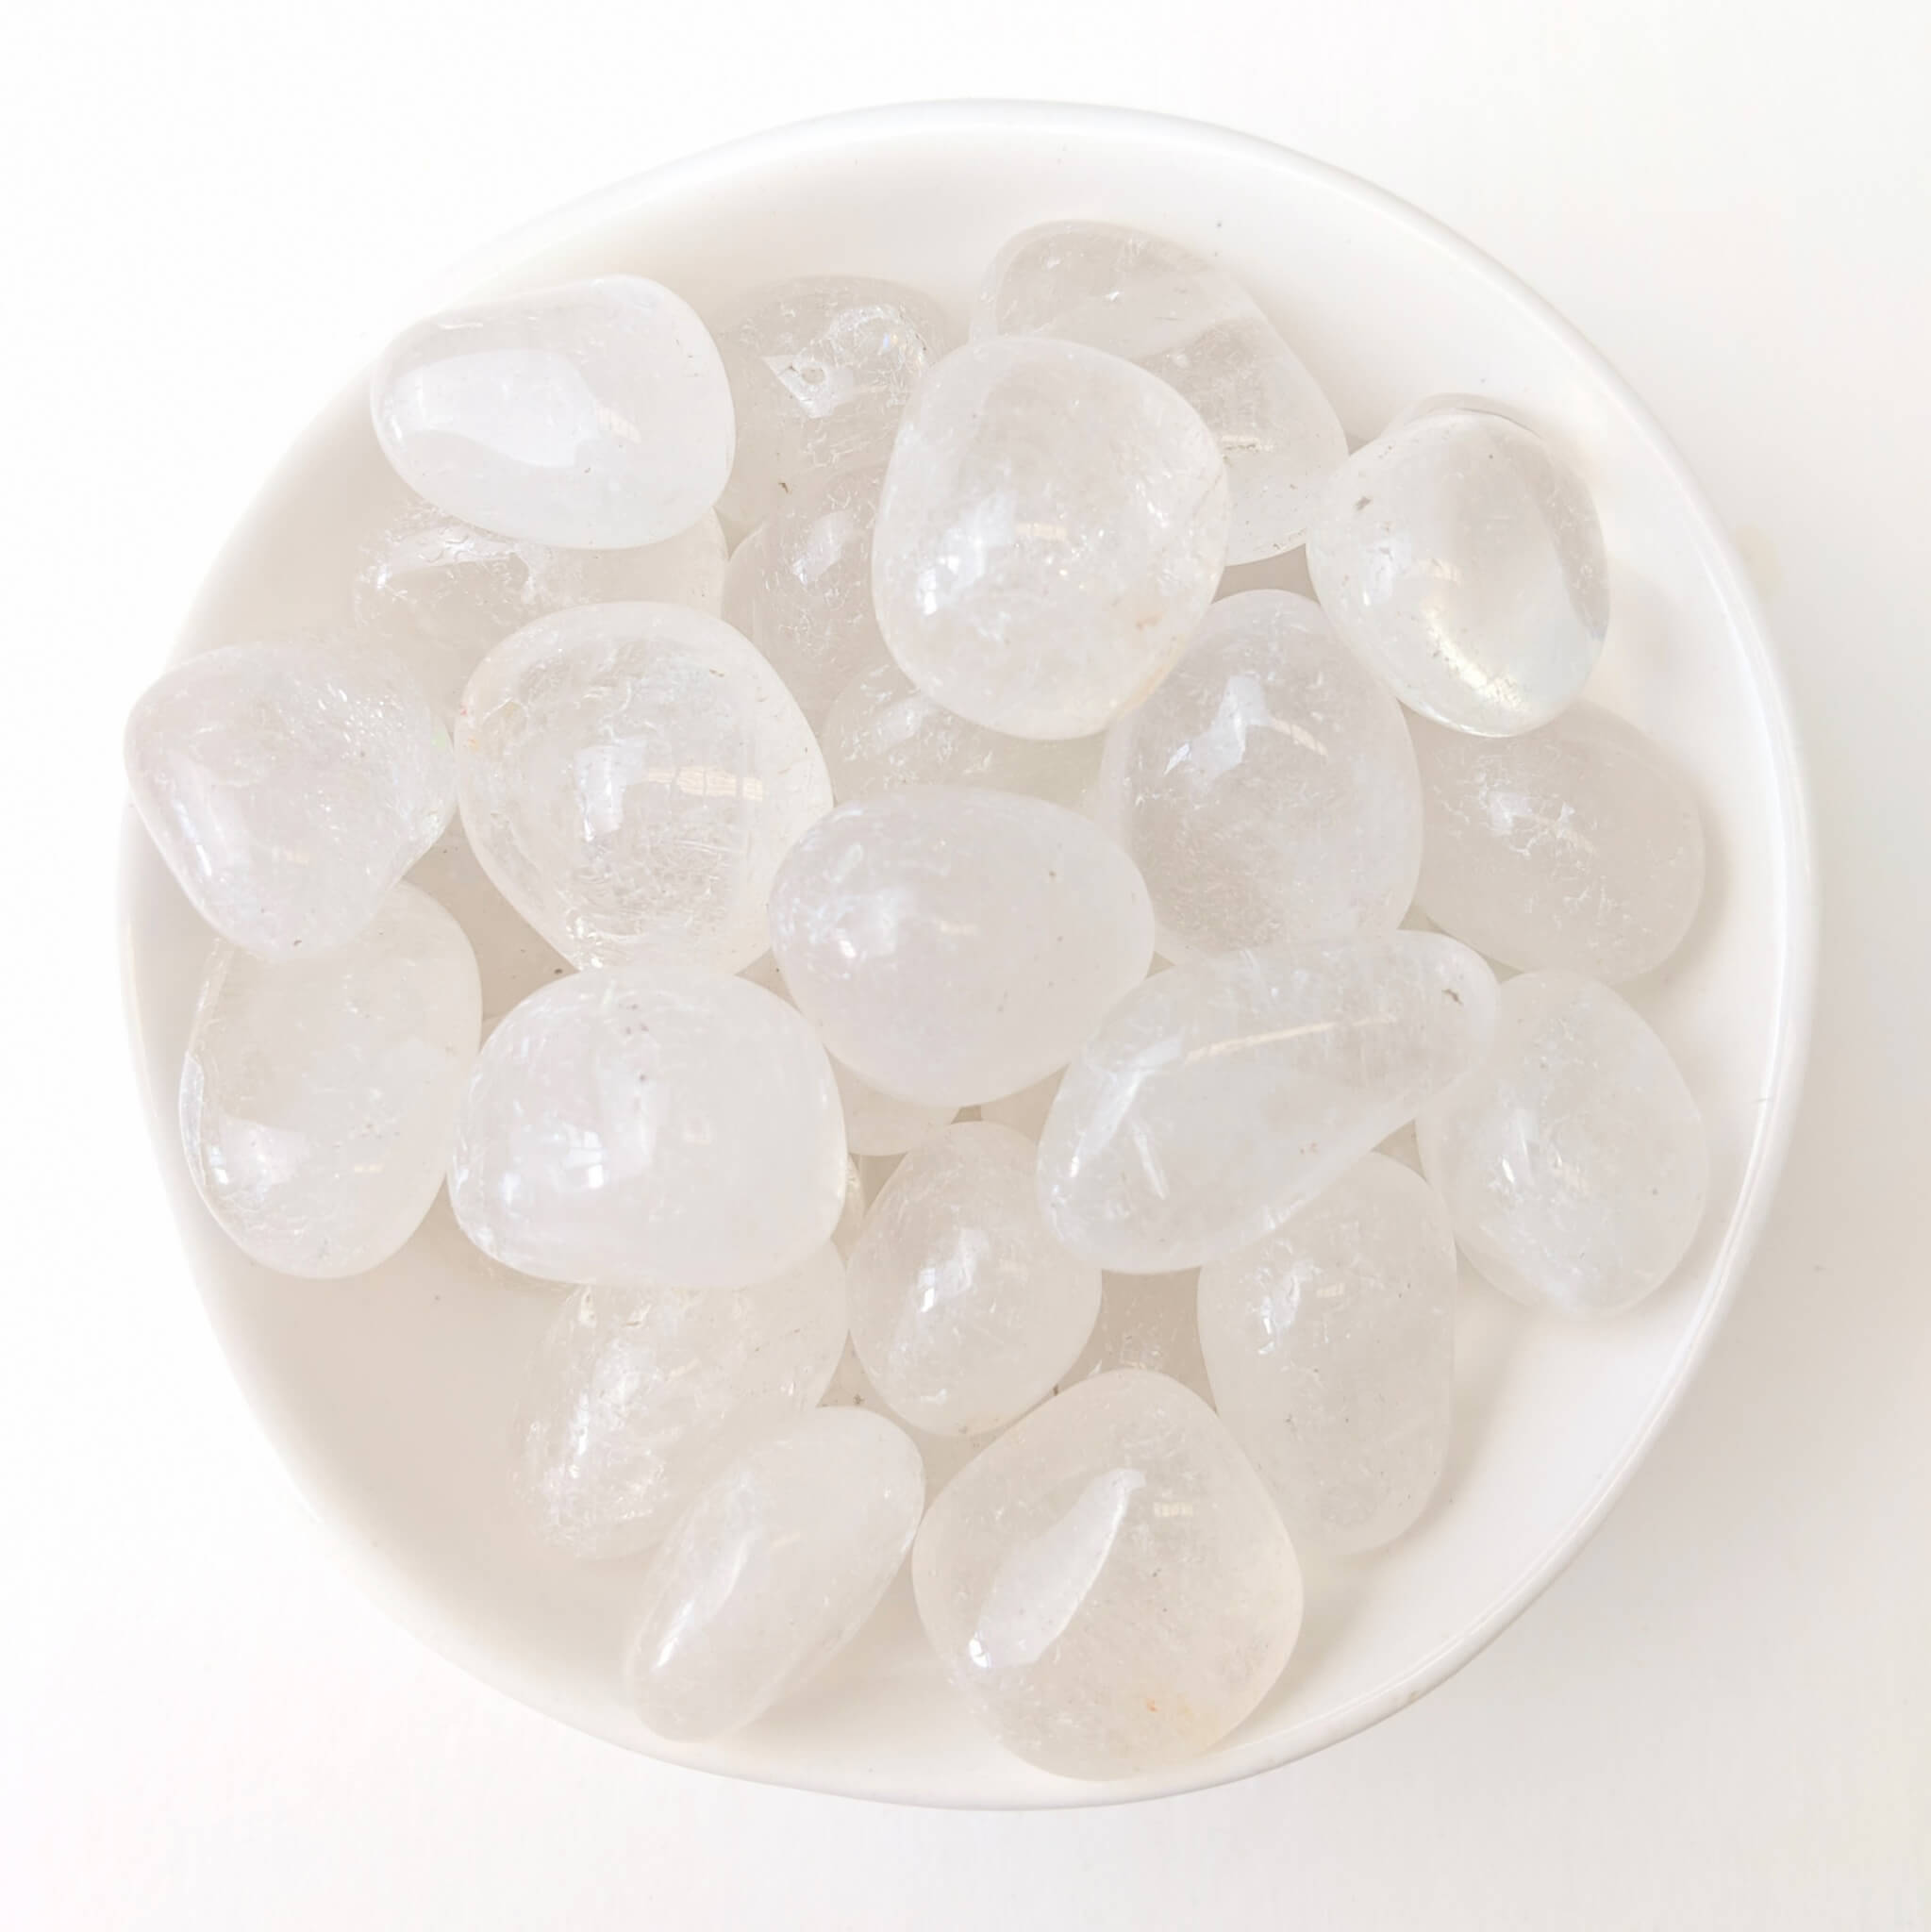 Clear Quartz Crystal Tumble Stones in a White Bowl Top View